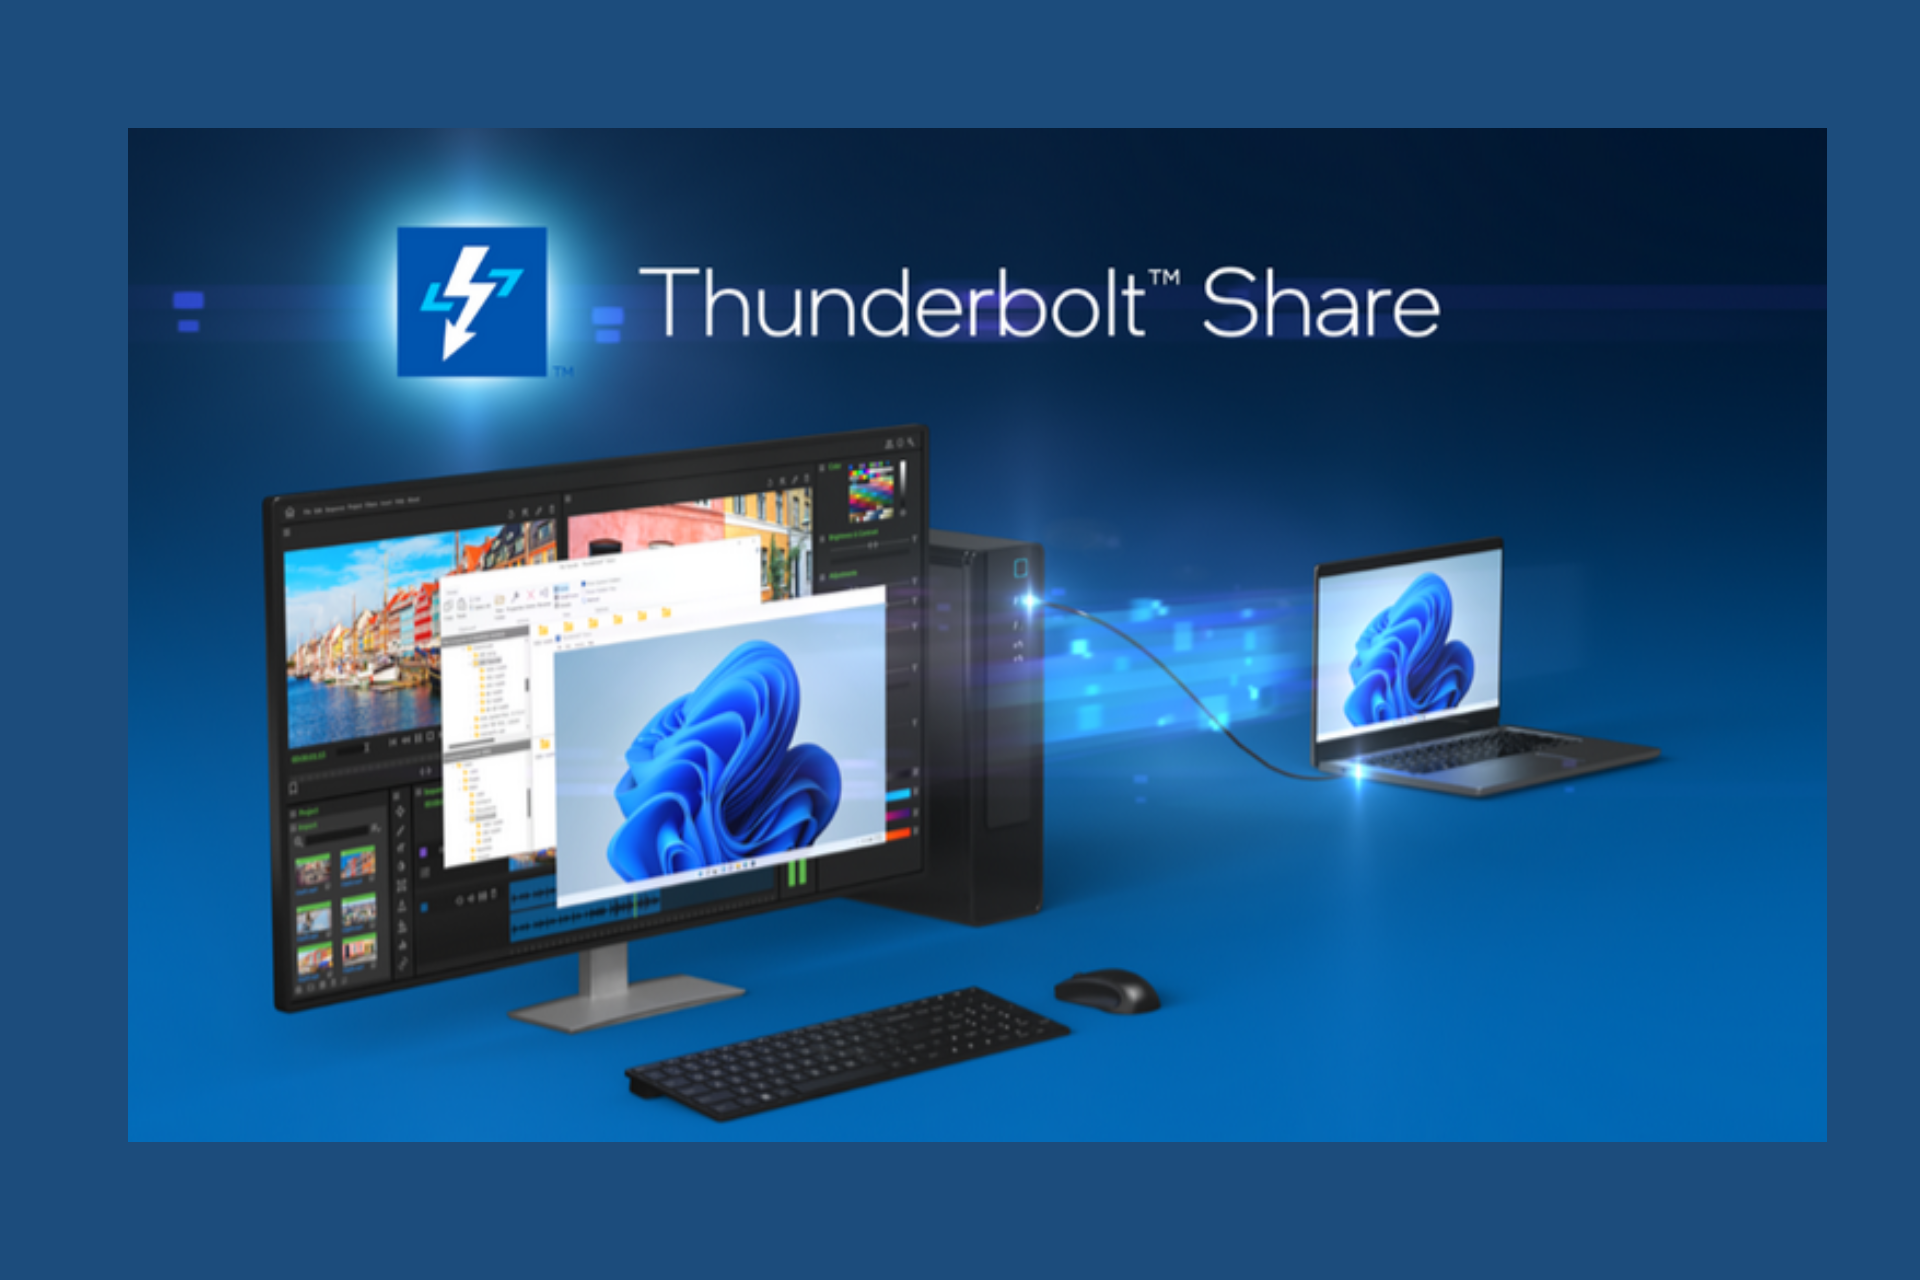 Intel introduces Thunderbolt Share, which makes interaction between two PCs easier